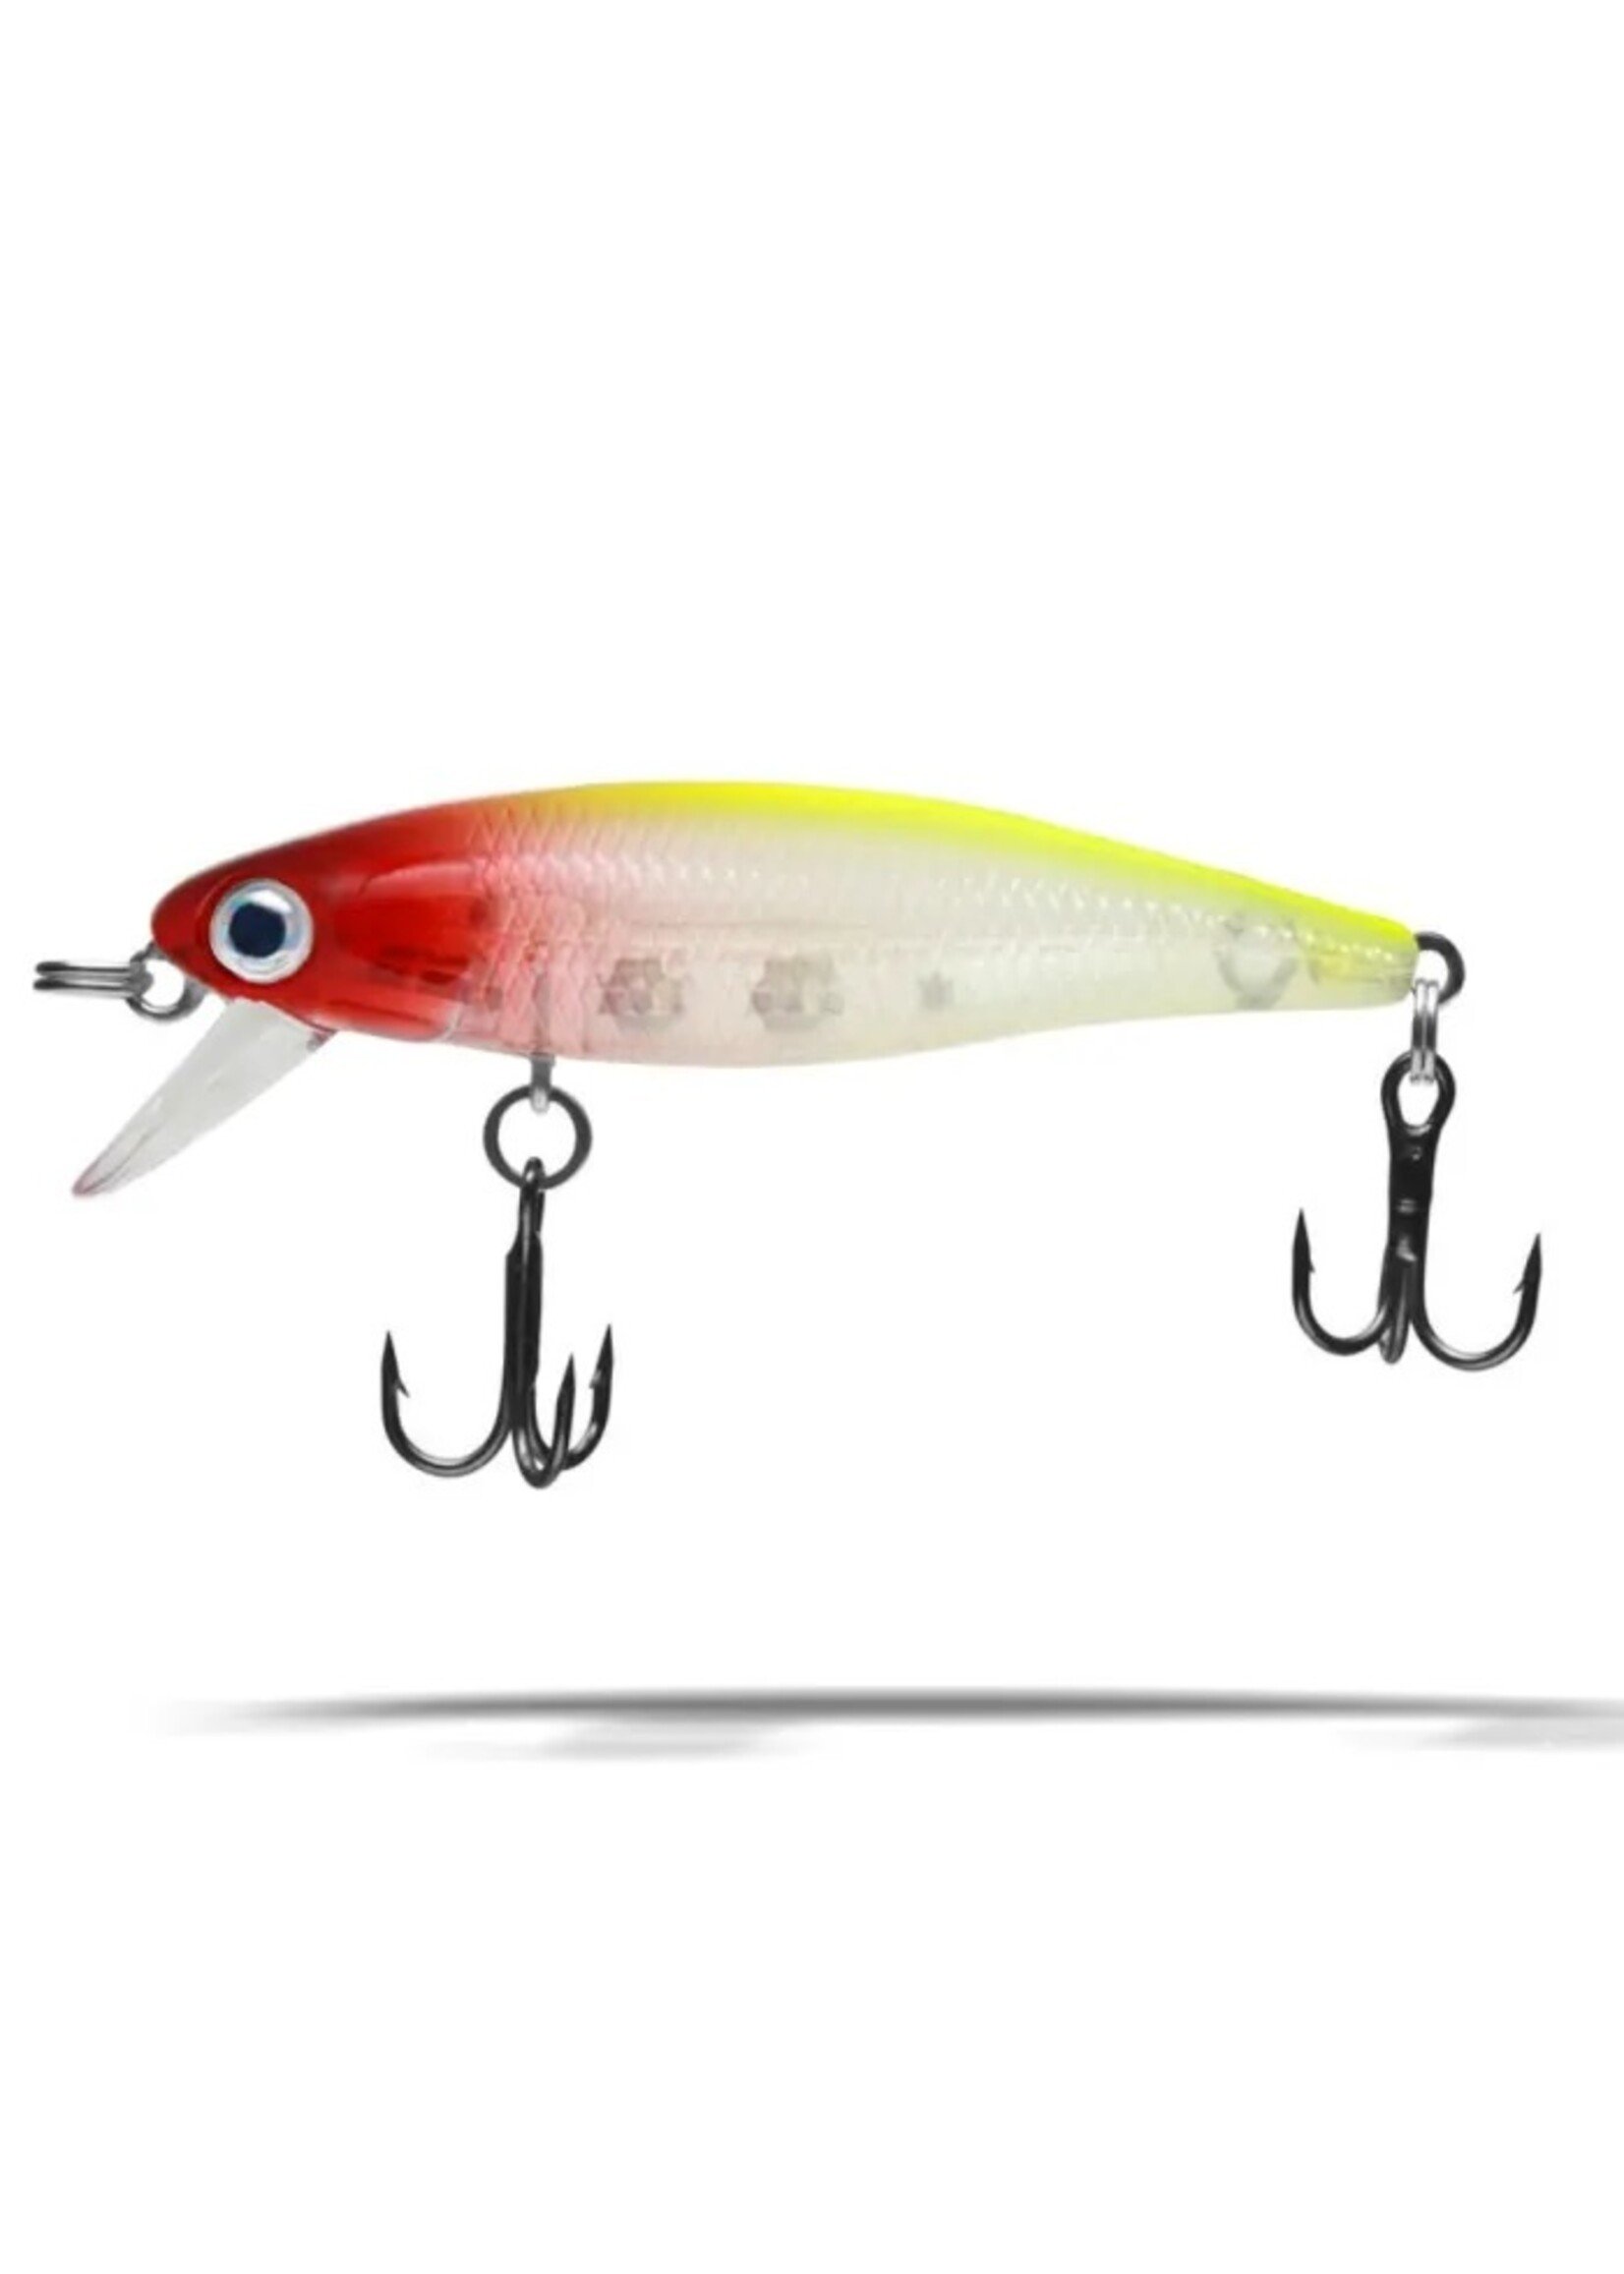 Pin on Lures for Sale